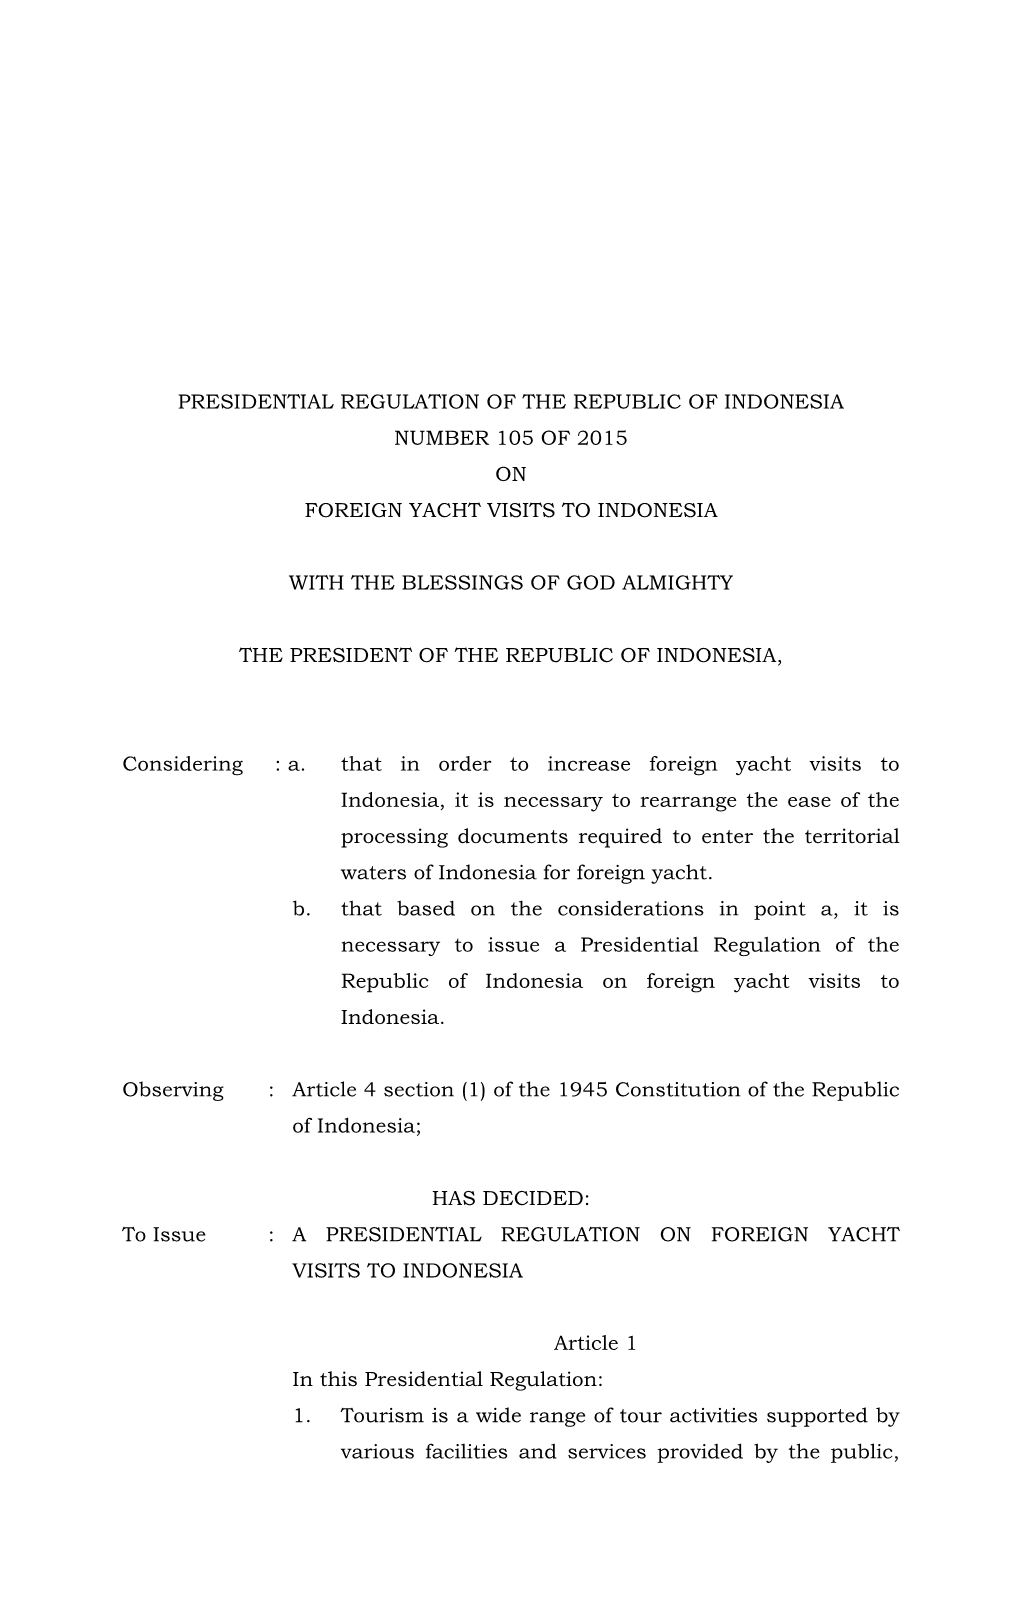 Presidential Regulation of the Republic of Indonesia Number 105 of 2015 on Foreign Yacht Visits to Indonesia